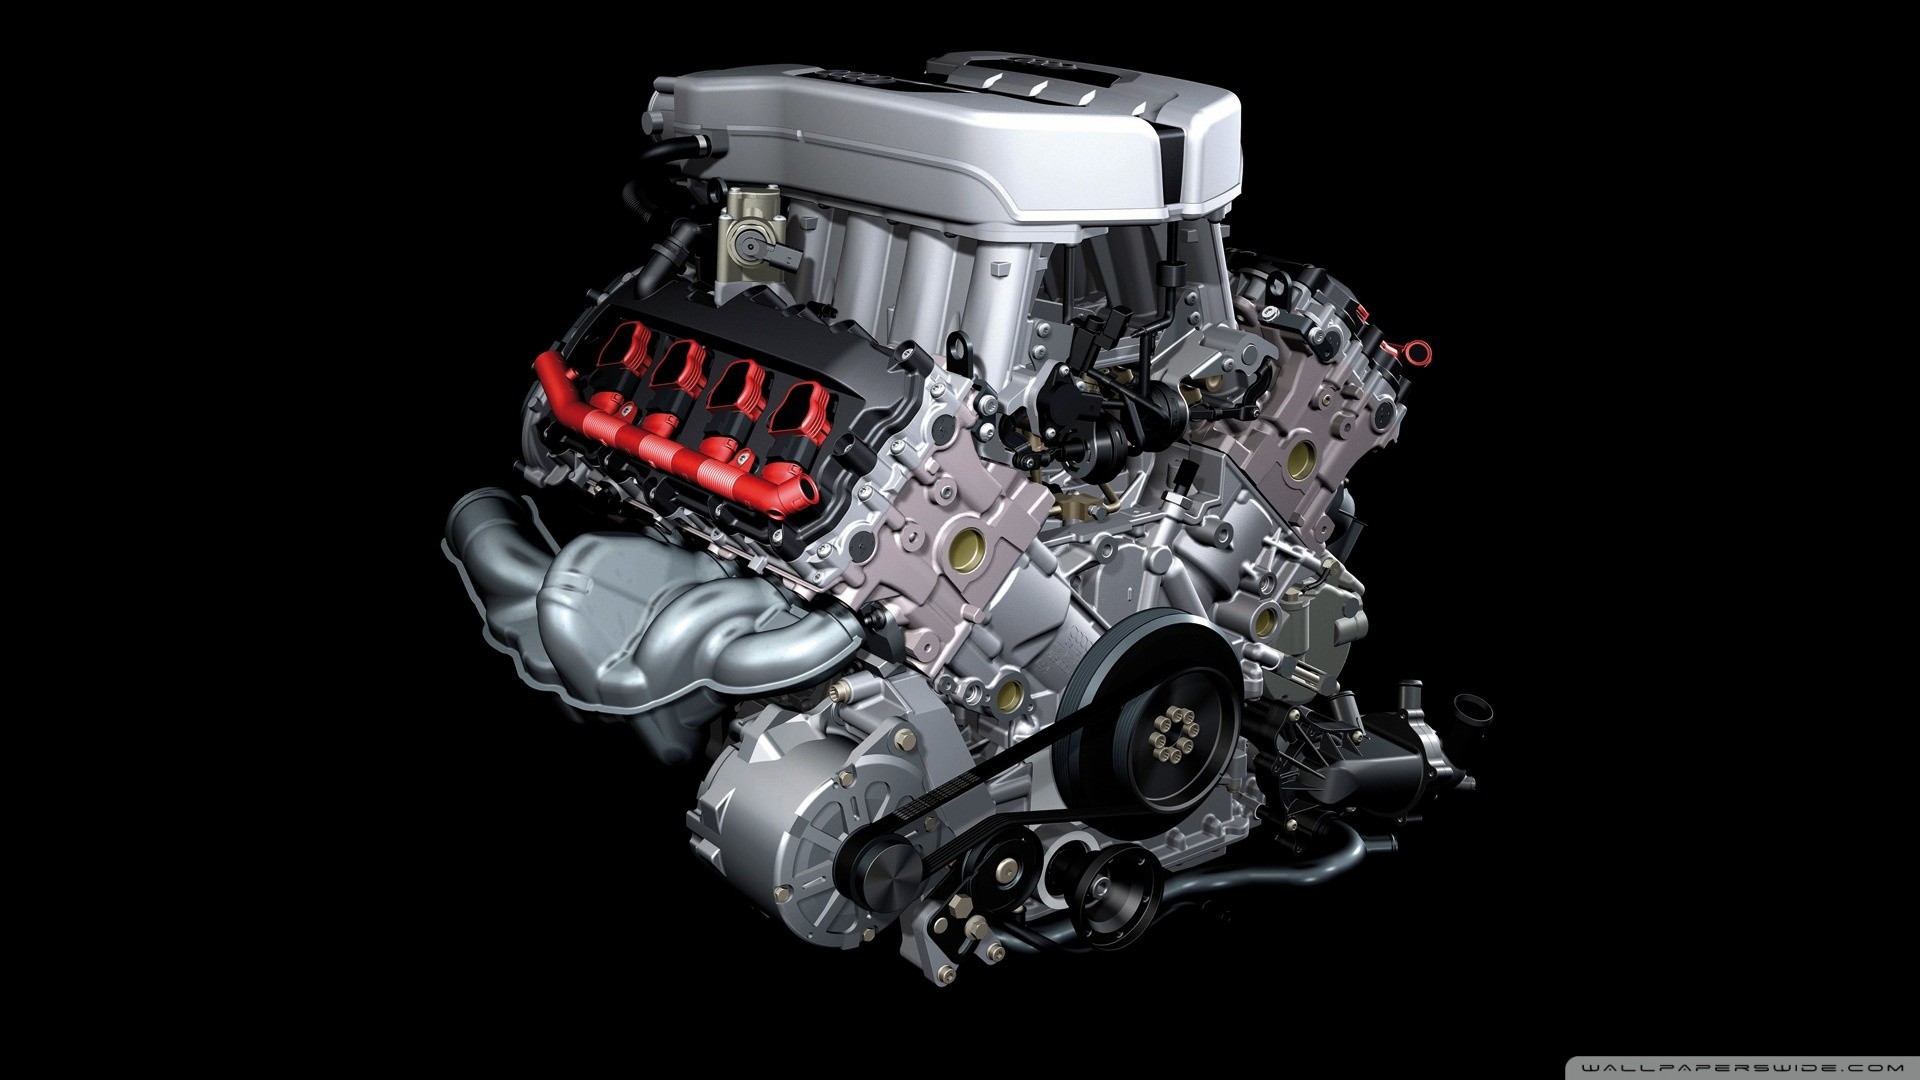 1920x1080 ... V8 Engine 3D Live Wallpaper - Android Apps on Google Play ...